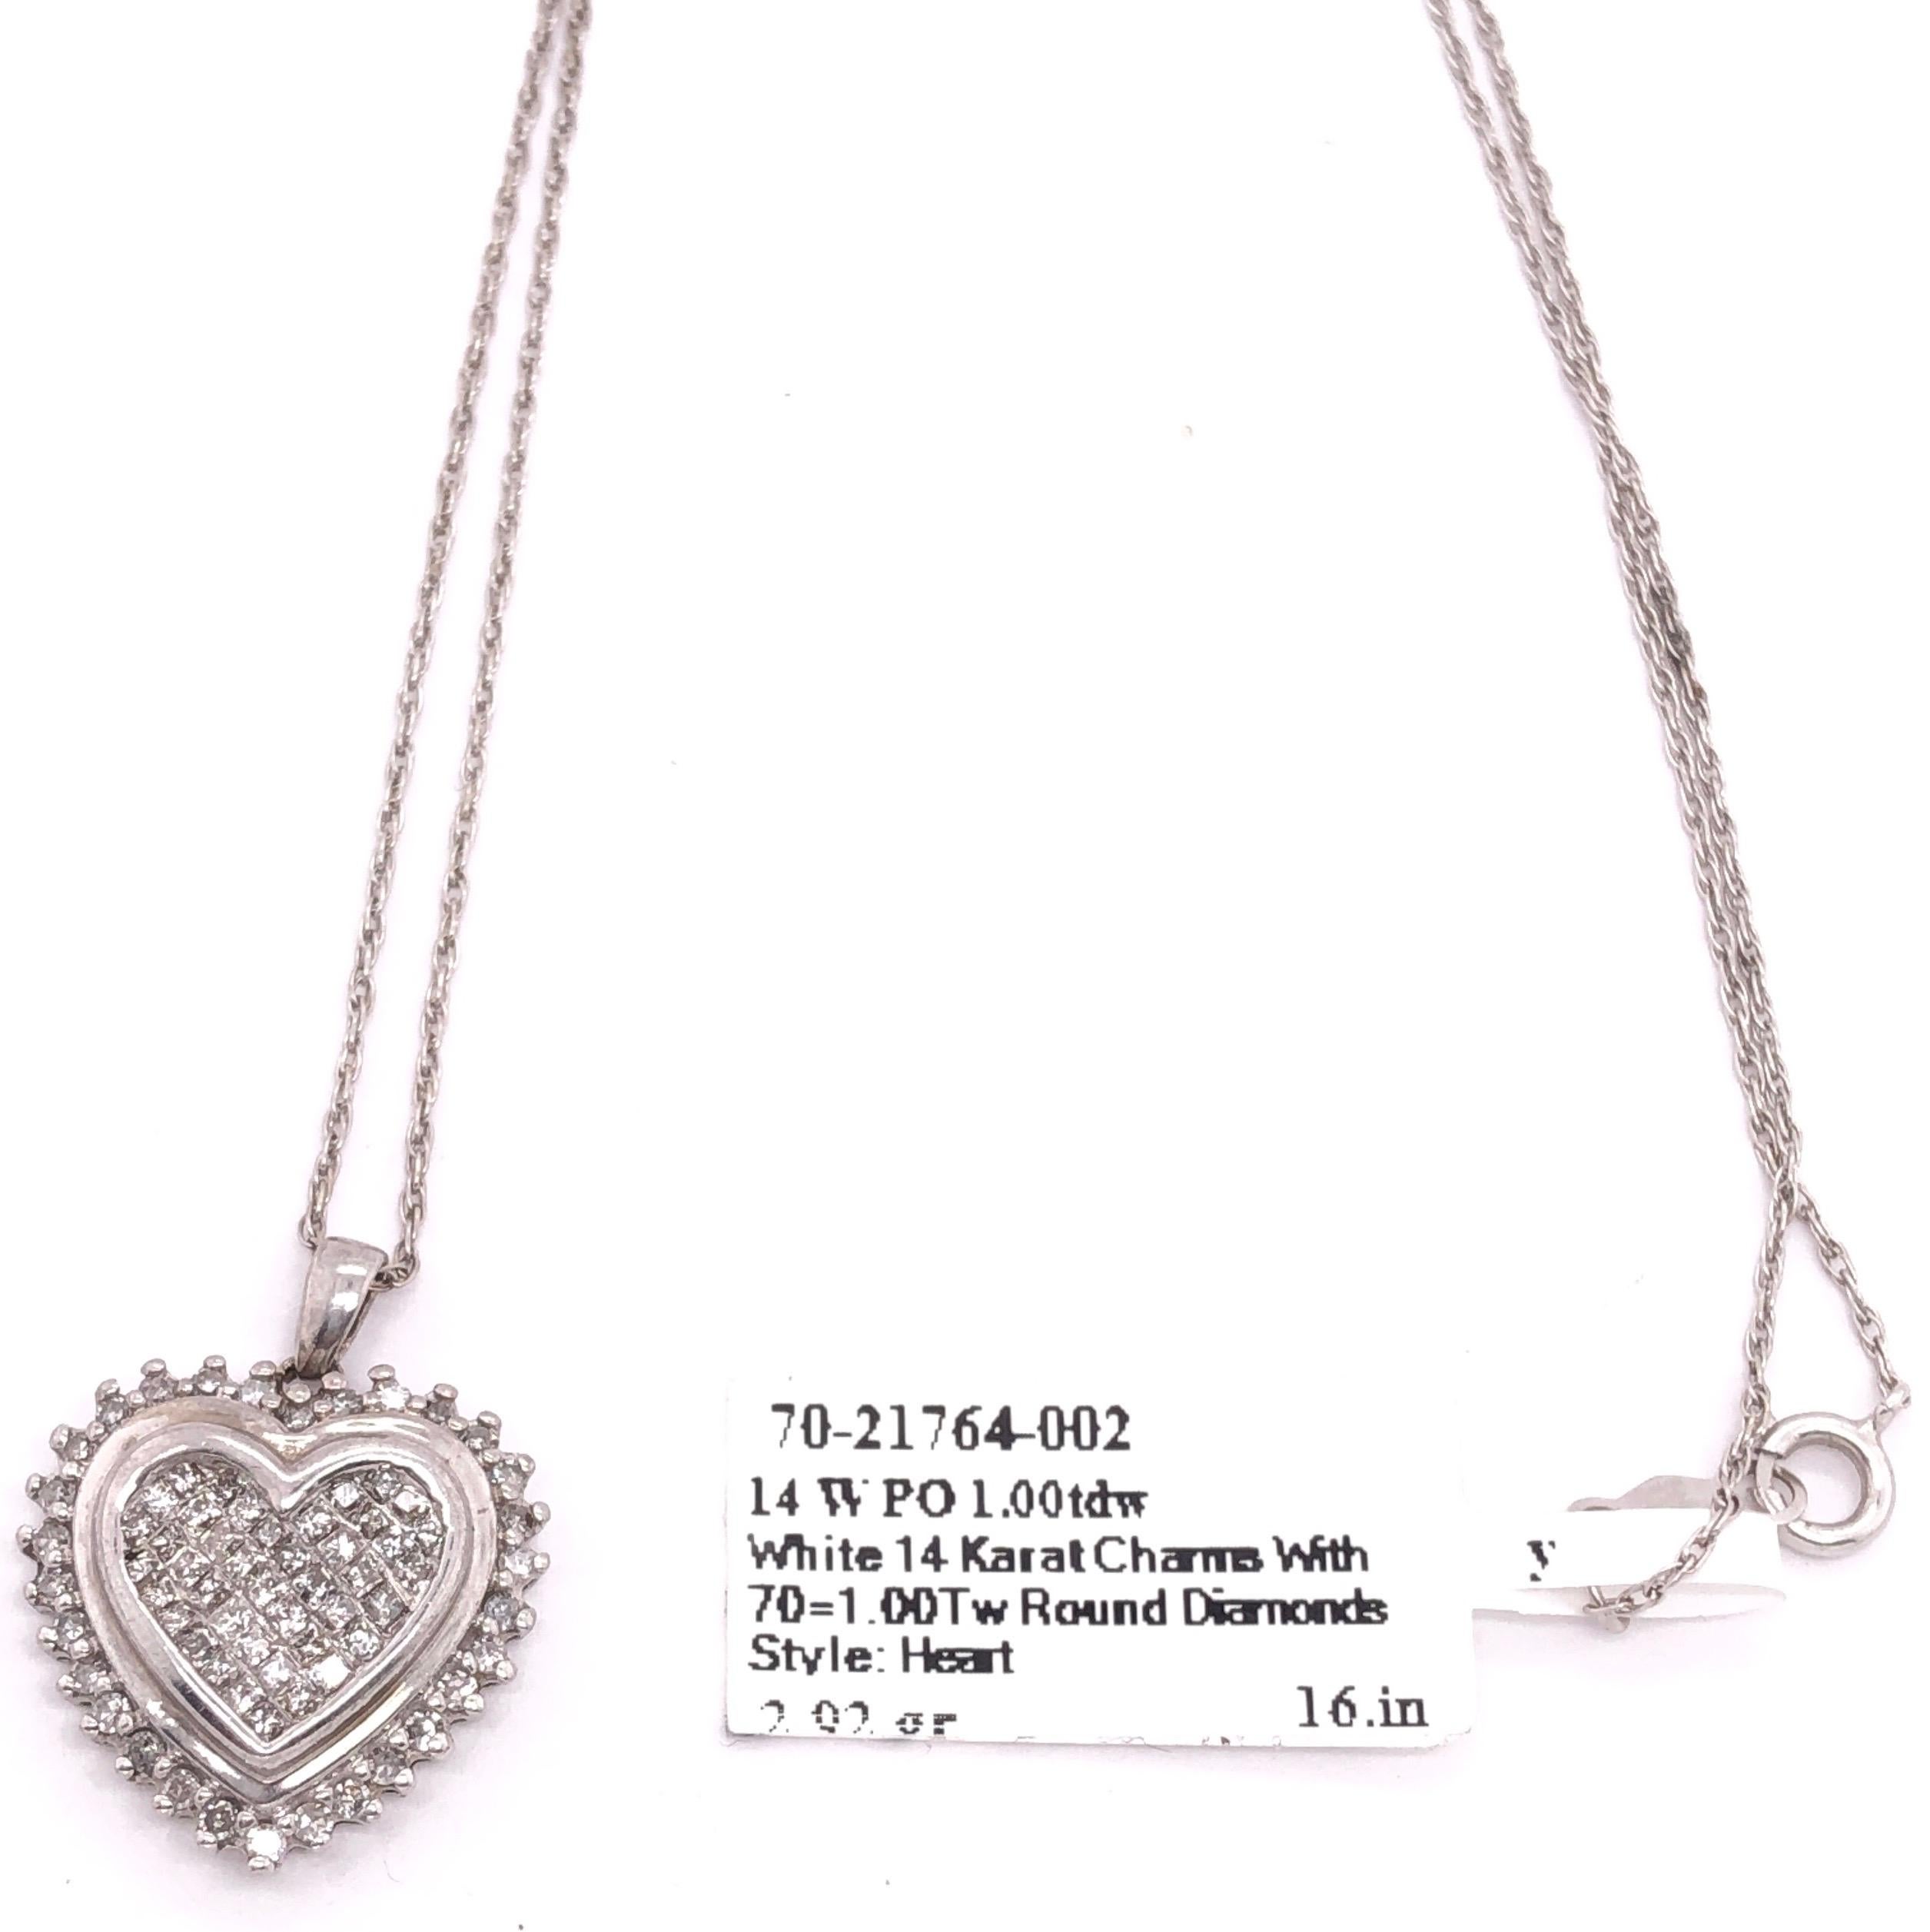 Women's or Men's 14 Karat White Gold Heart Pendant Necklace with Round Diamonds For Sale